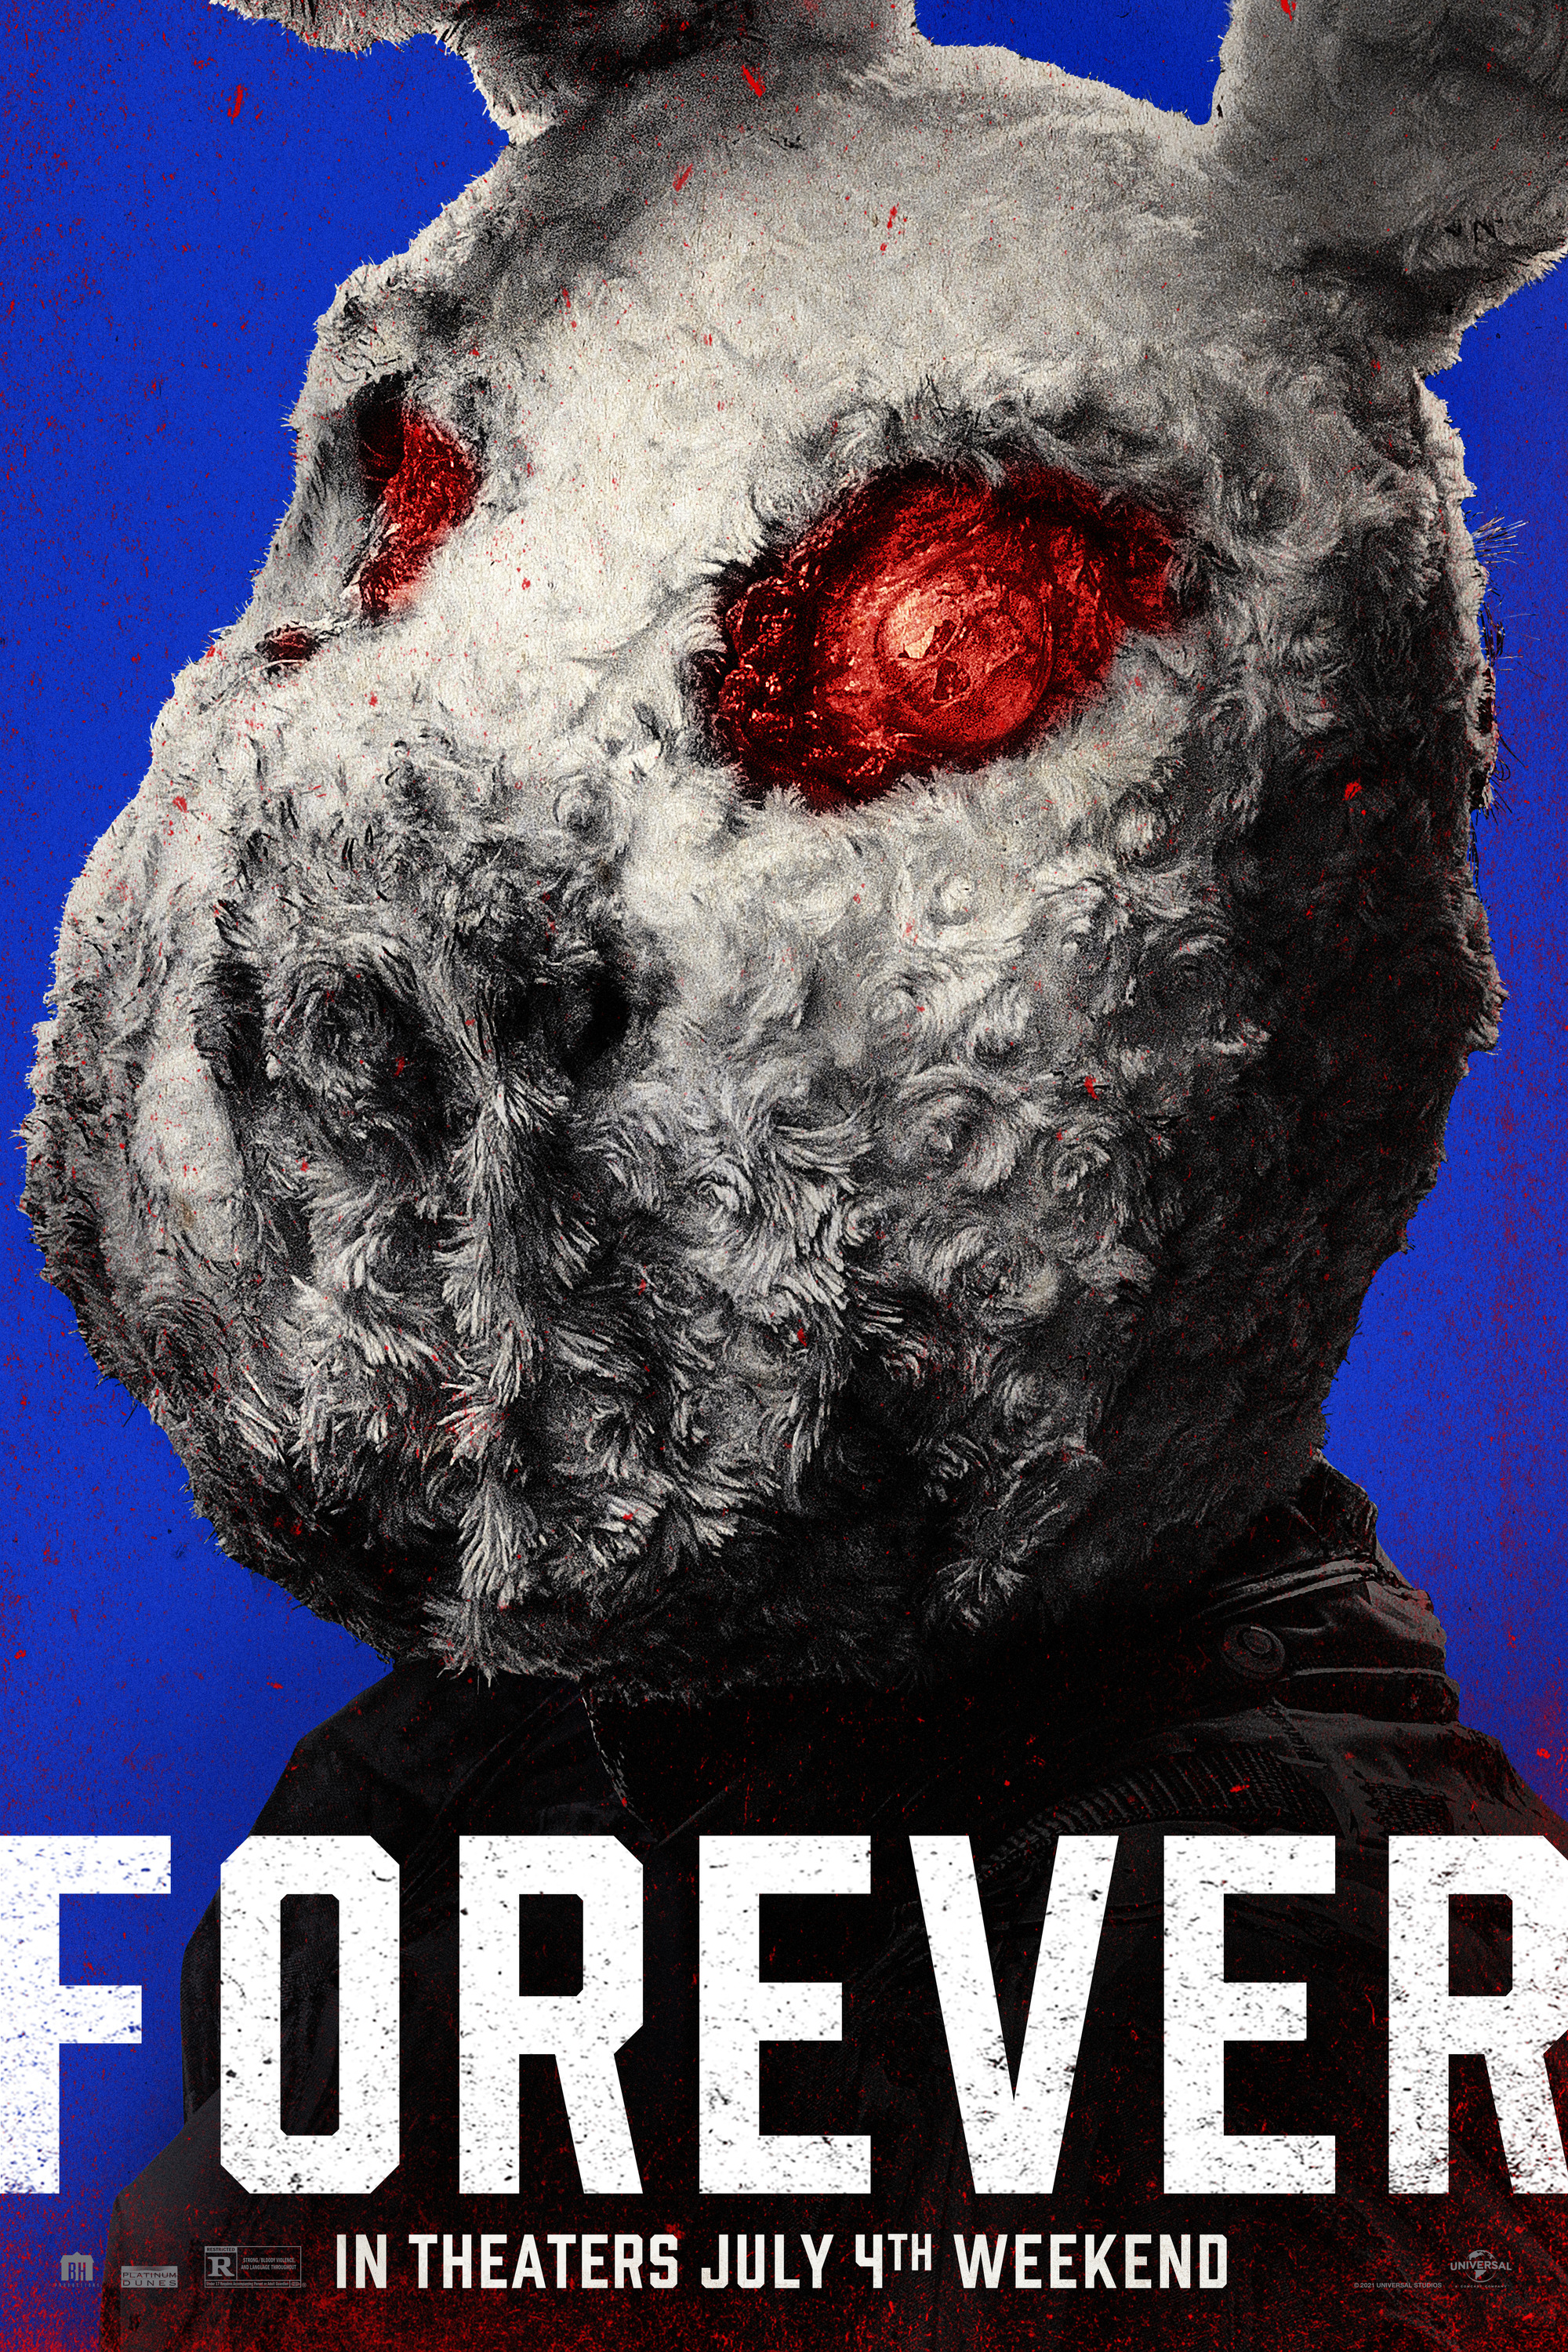 Mega Sized Movie Poster Image for The Forever Purge (#15 of 15)